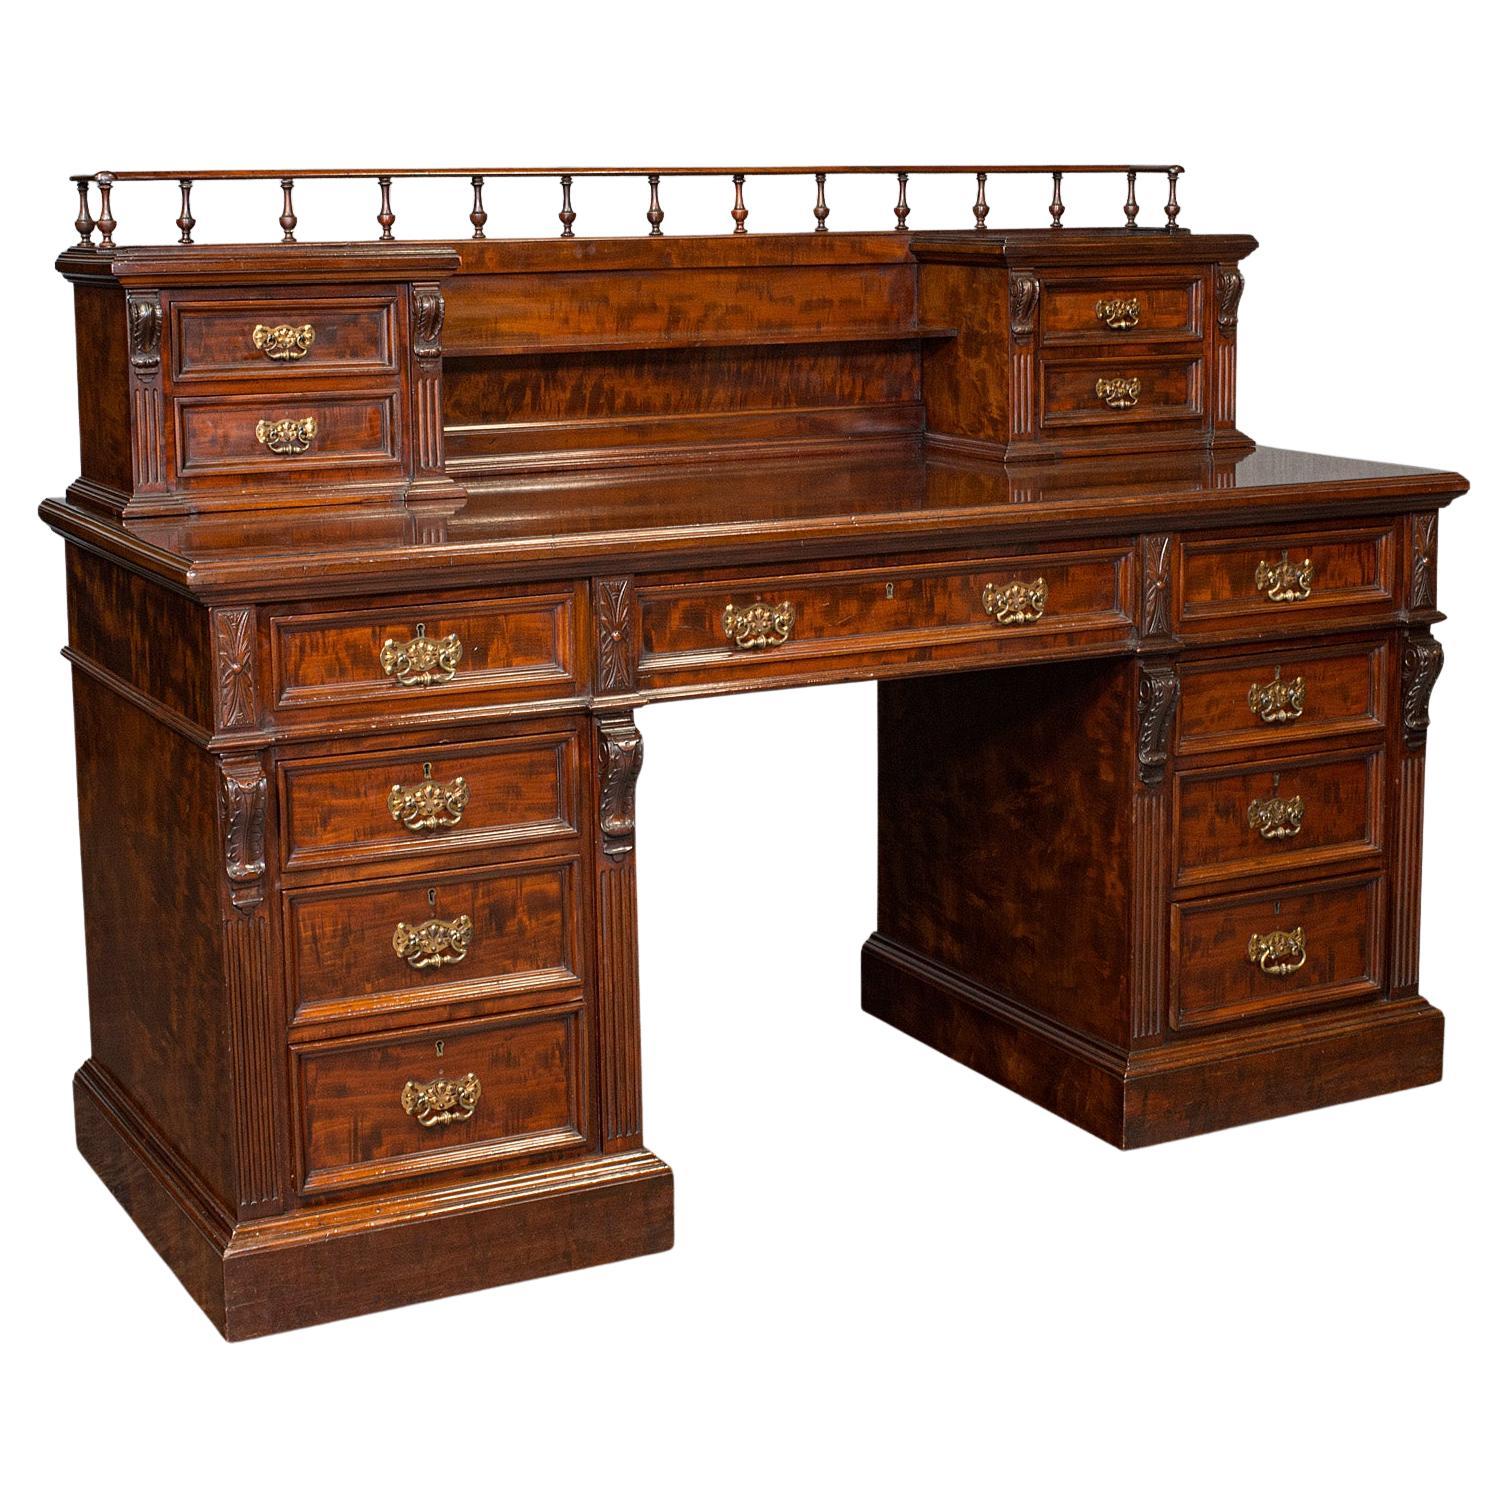 Grand Antique Executive Desk, English, Satinwood, 13 Drawer, Office, Victorian For Sale